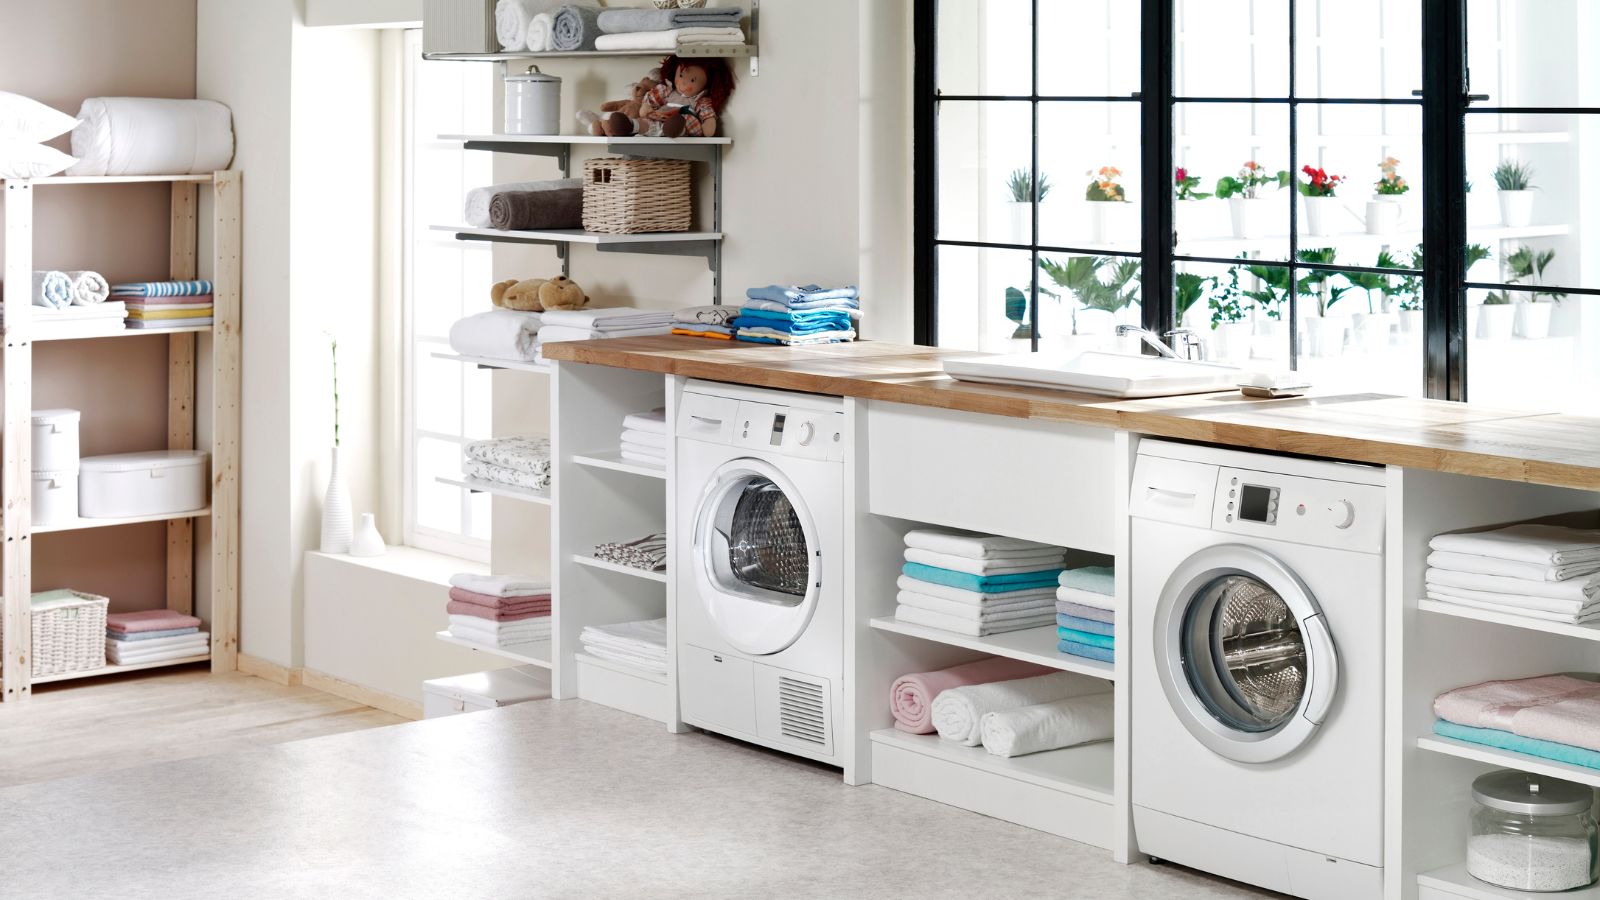 Tips for Tiling Your Laundry Room